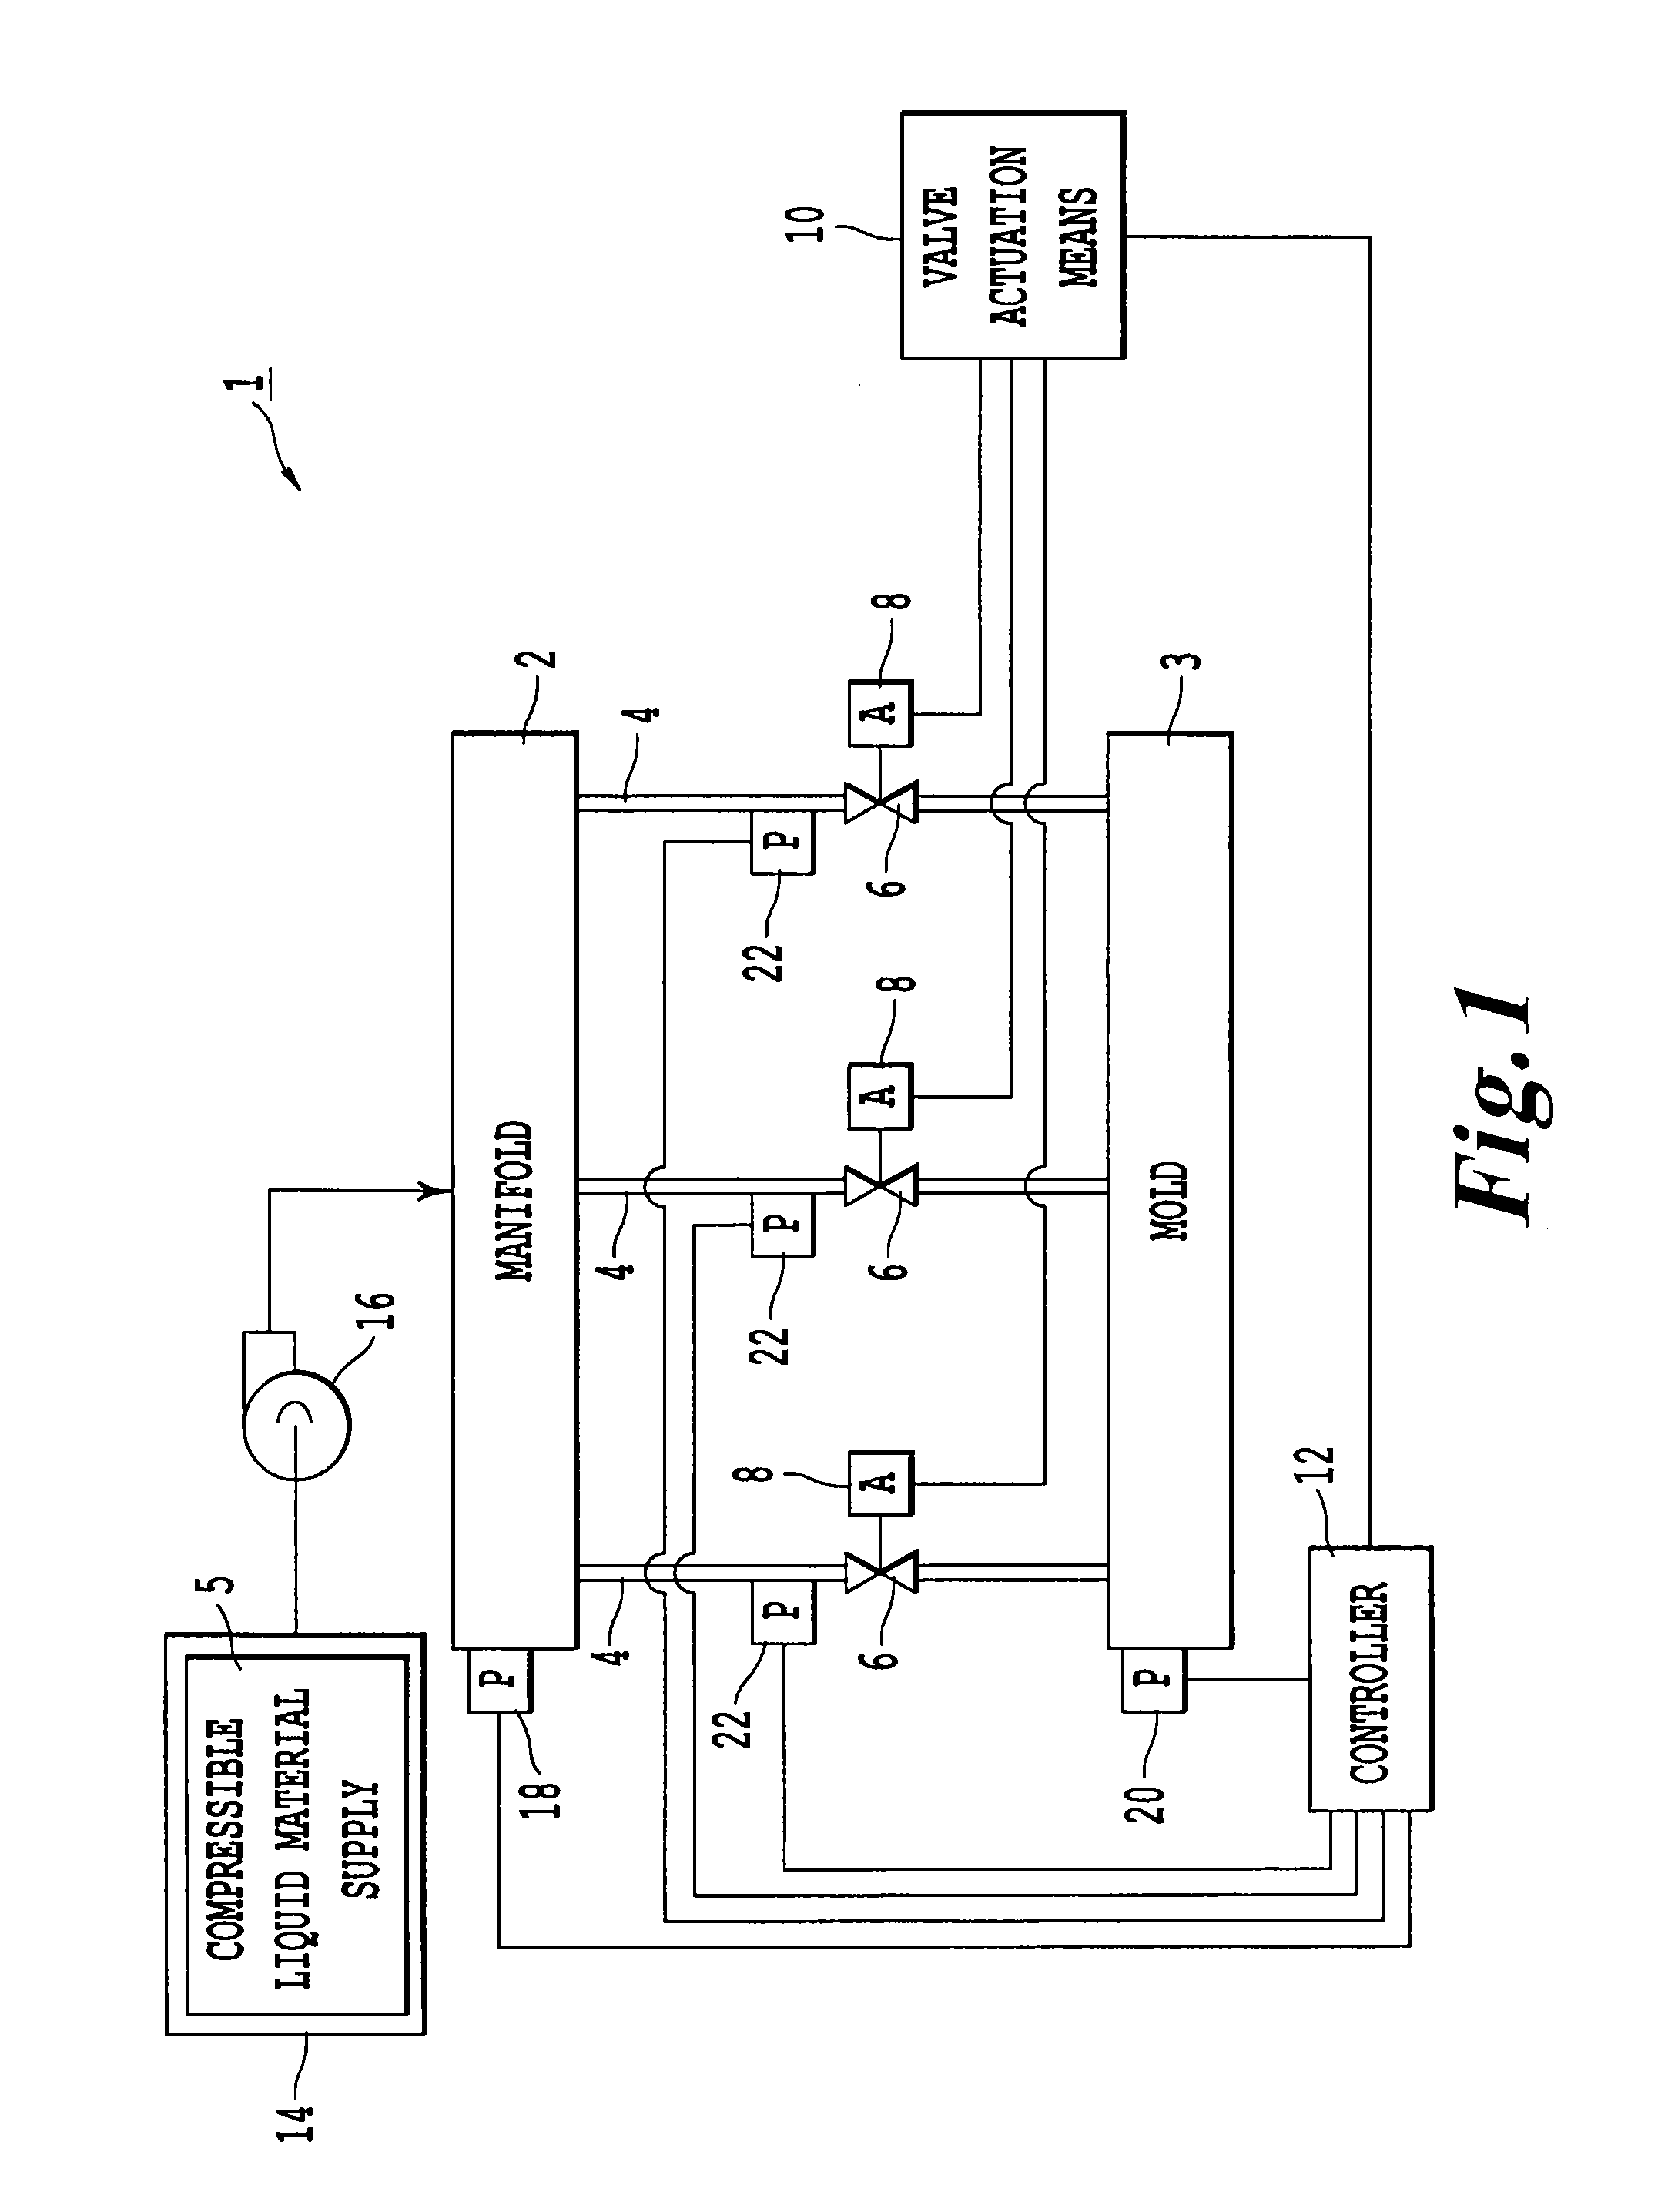 Apparatus and method for filling a mold with a liquid material